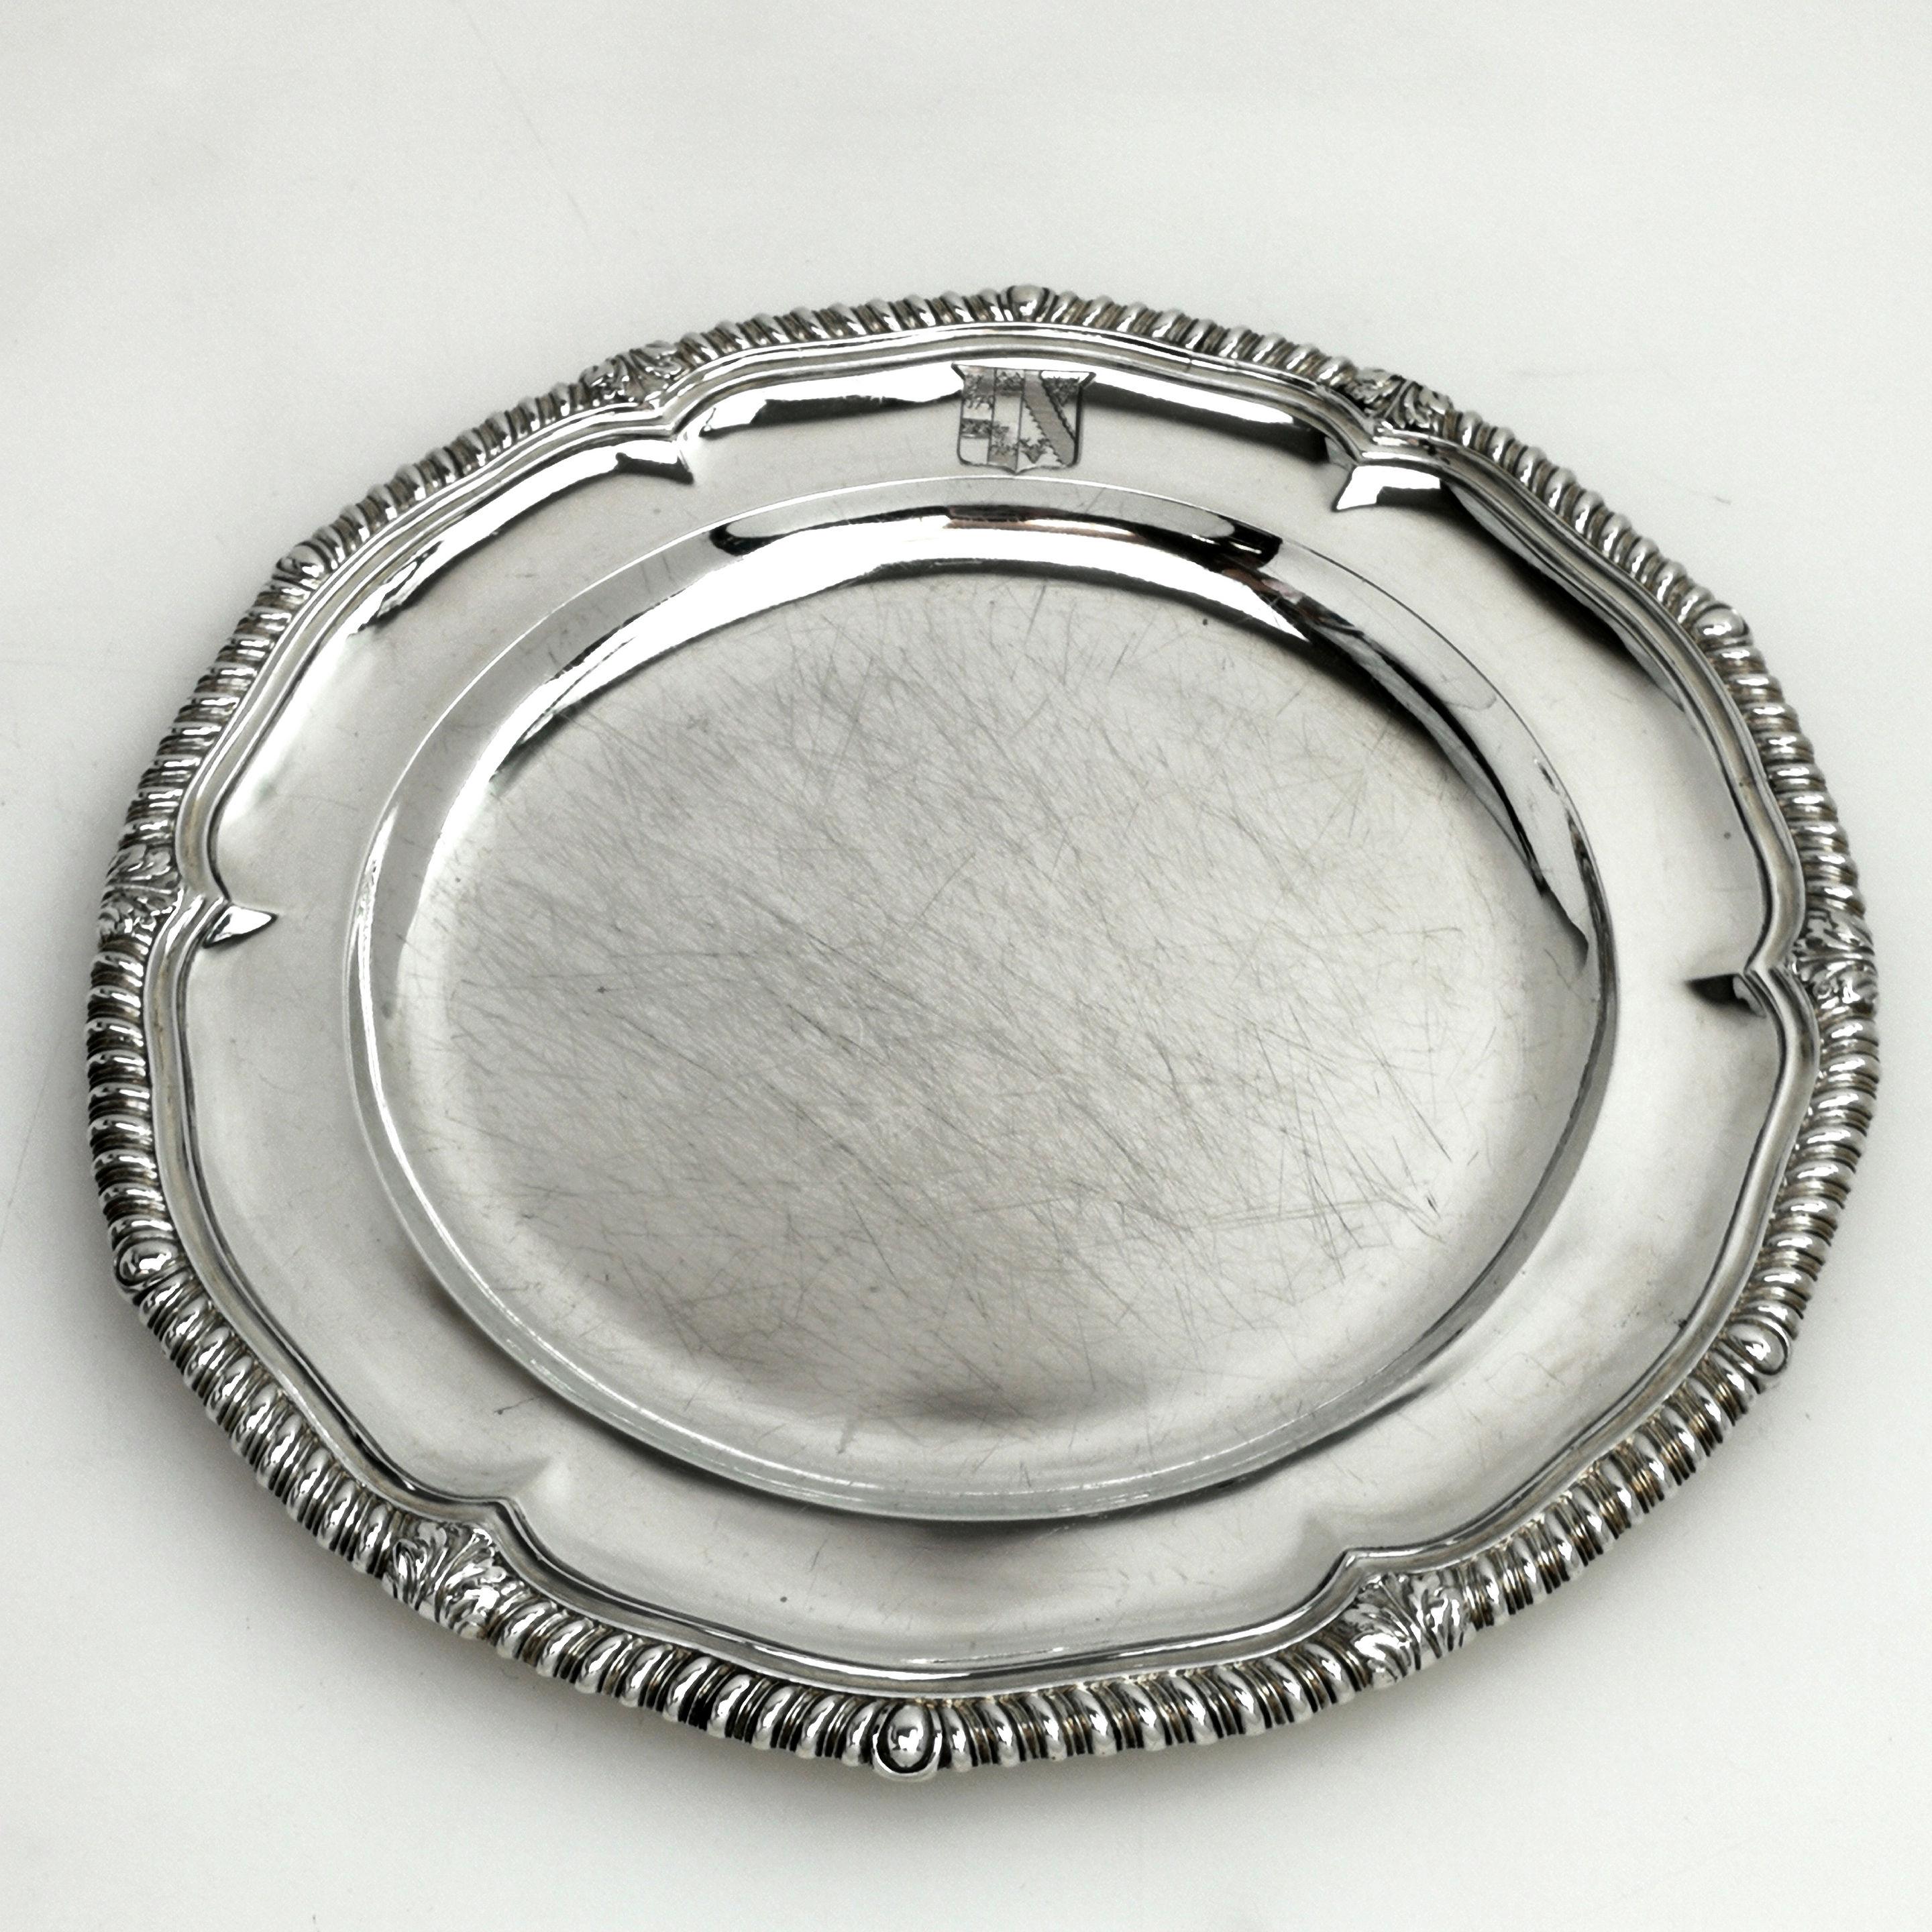 19th Century Set of 12 Antique George III Sterling Silver Dinner Plates 1820 Georgian Plates